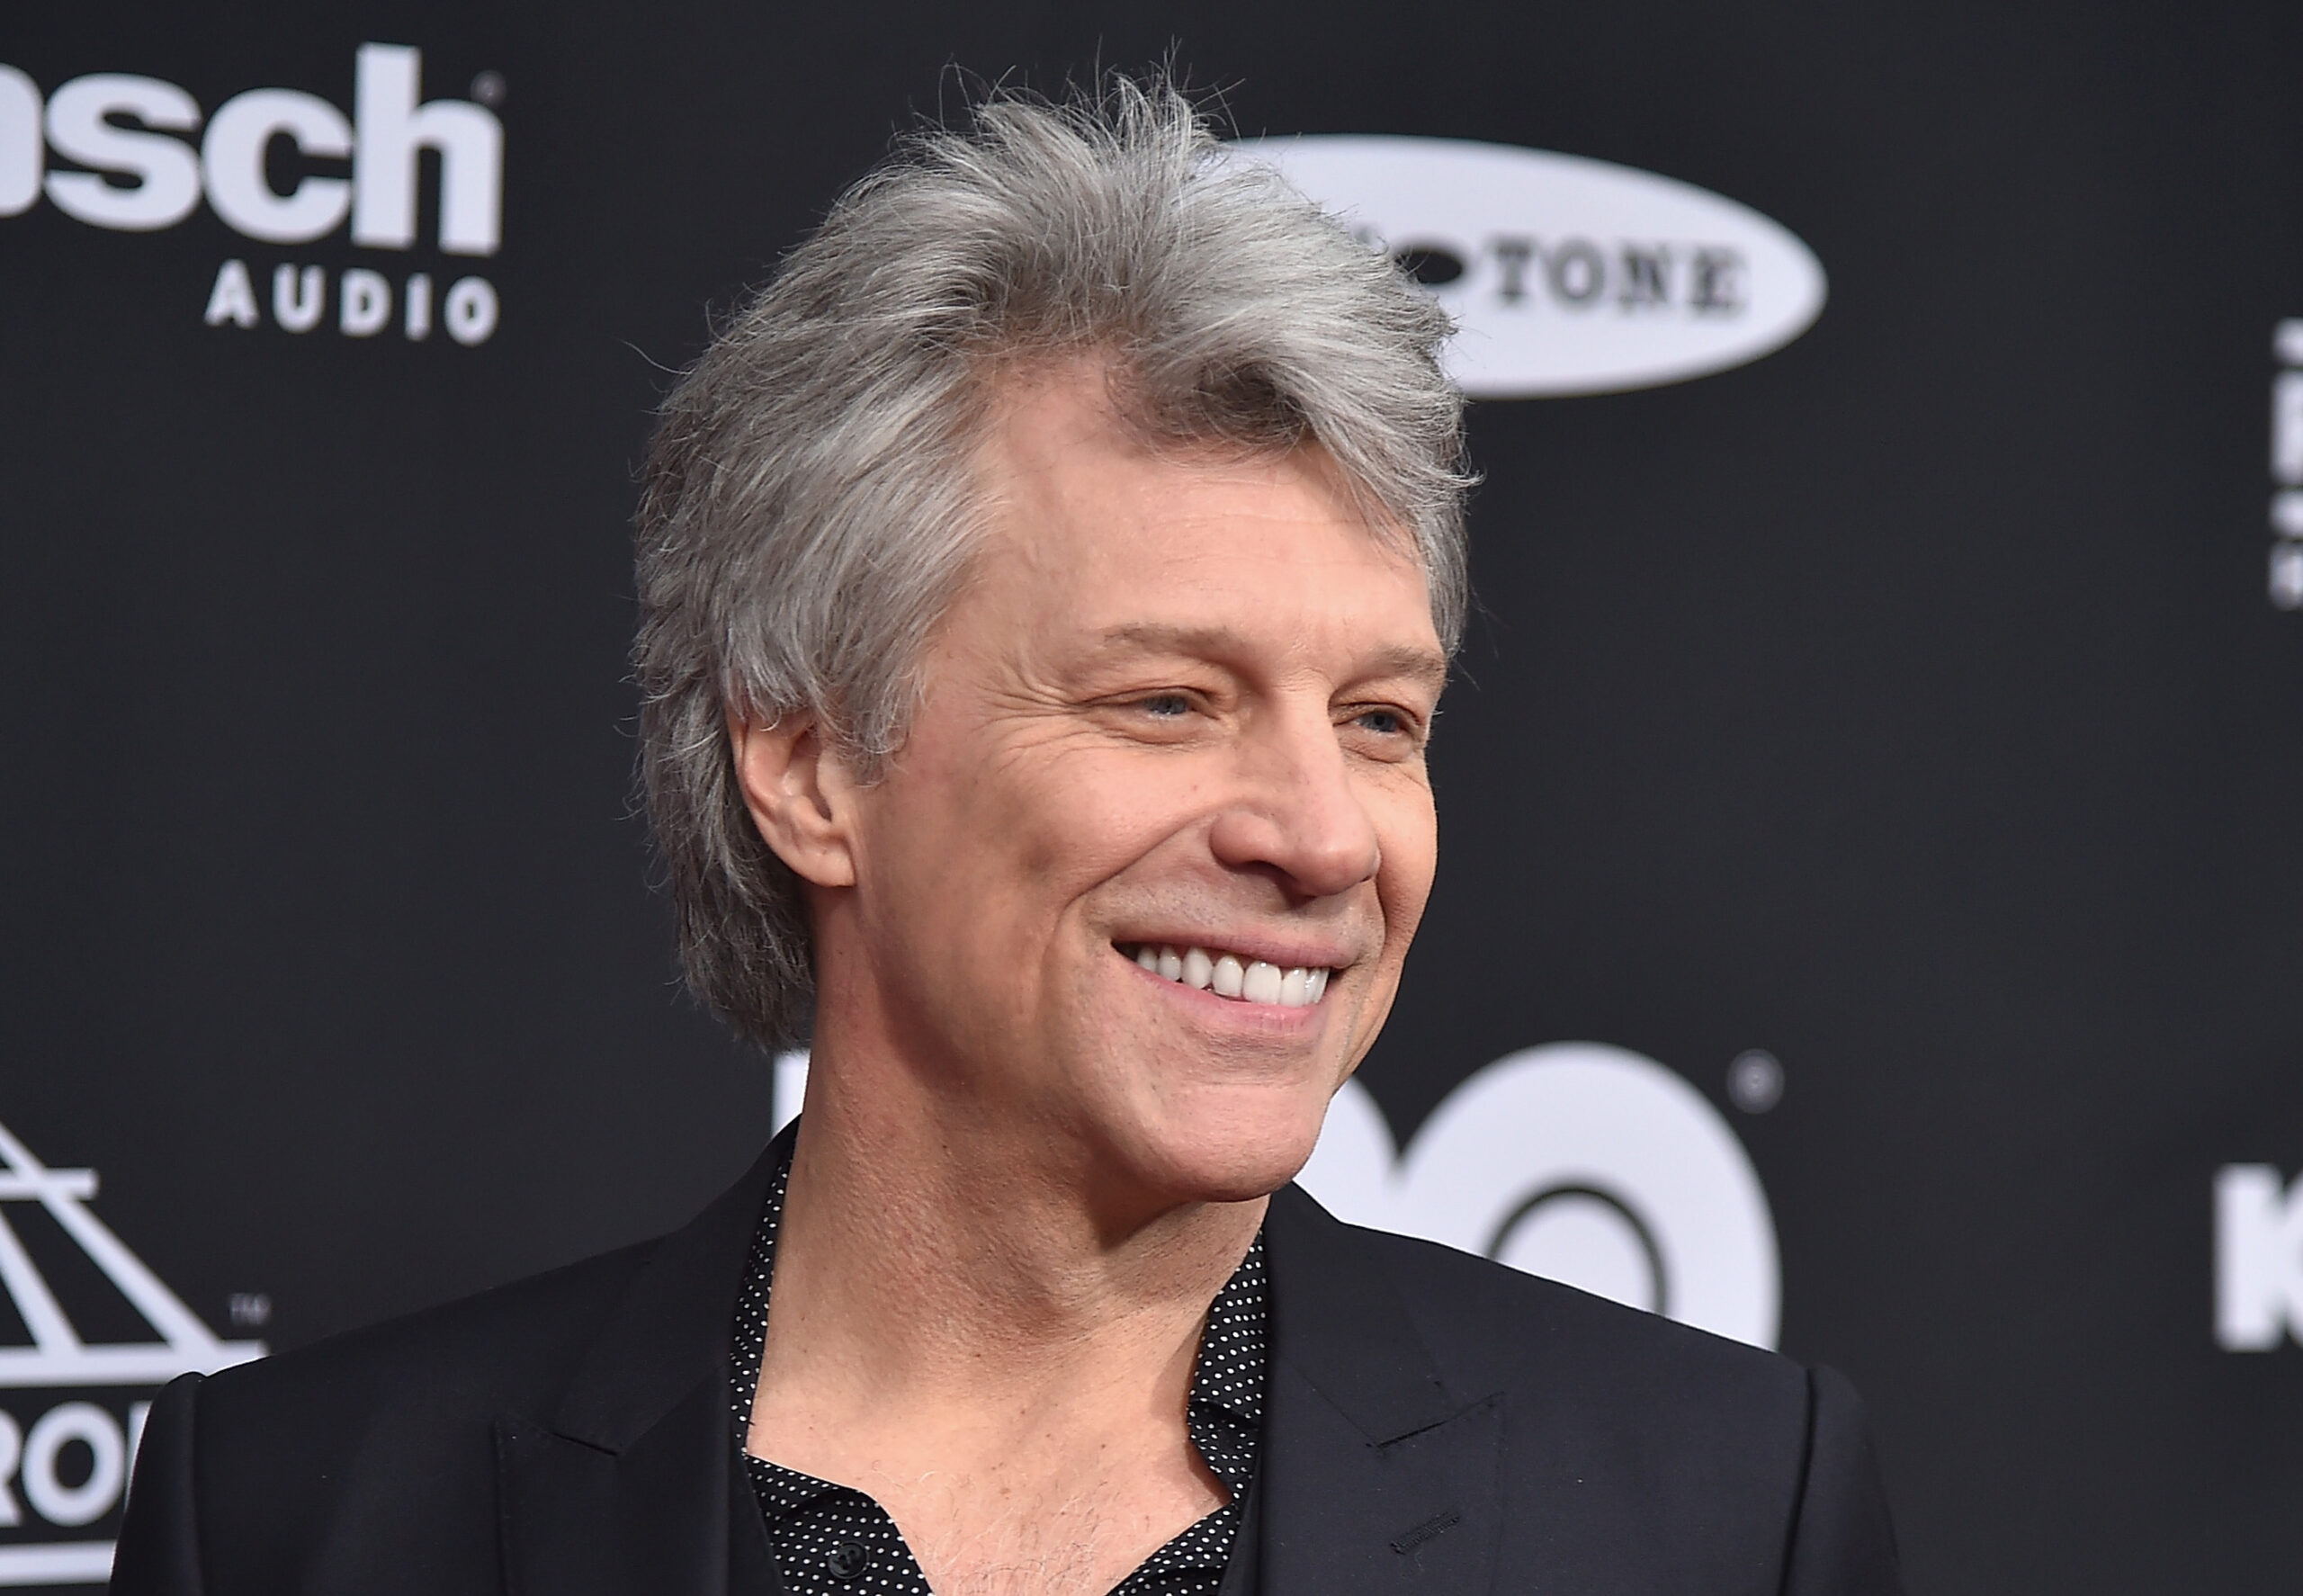 Jon Bon Jovi OK with son’s engagement to Millie Bobby Brown, age not a concern.